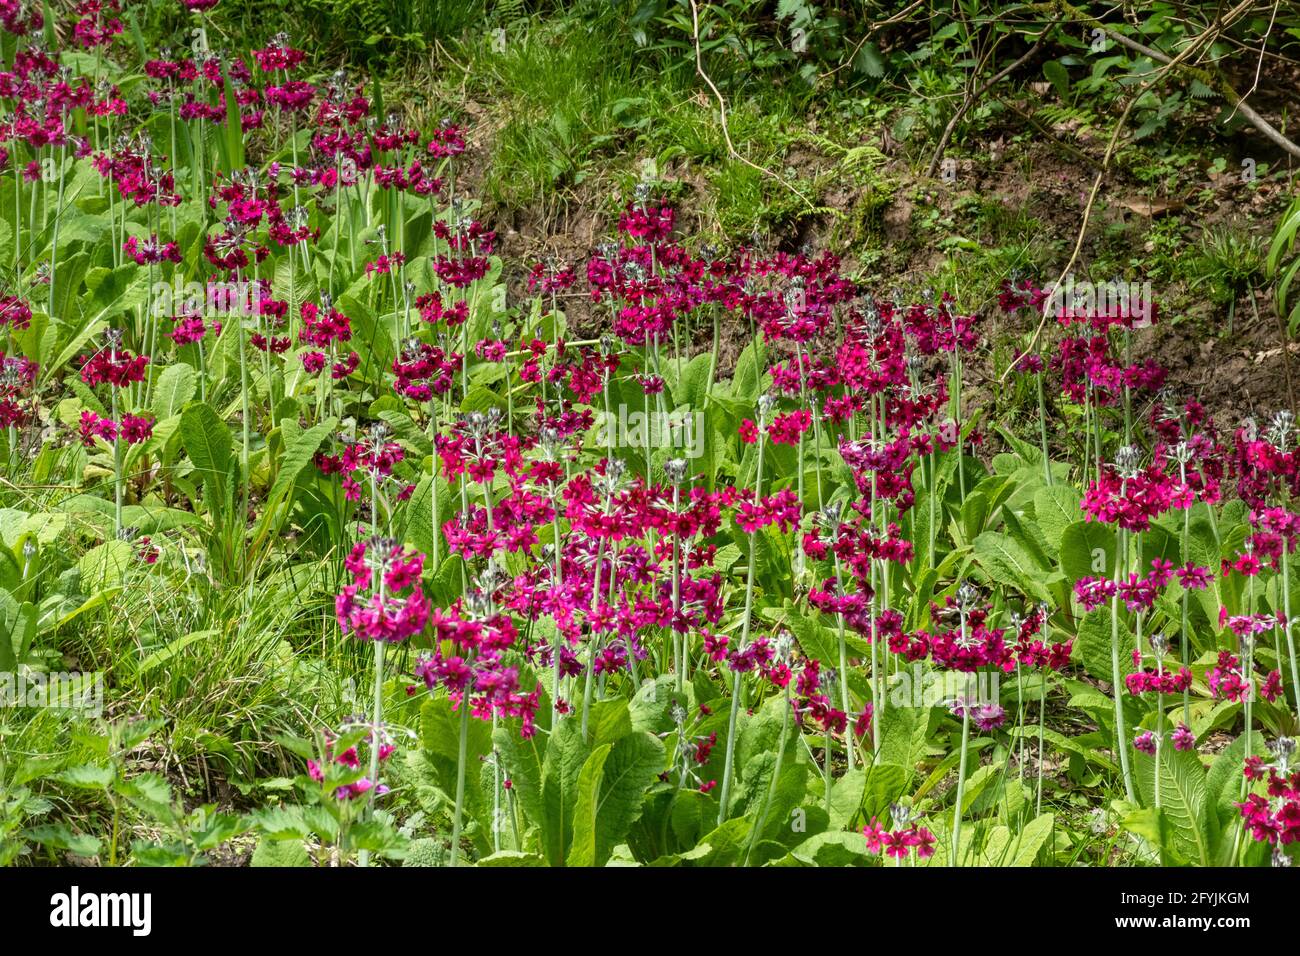 Candelabra primula (Primula pulverulenta) flowers growing in damp shady area of a garden in West Sussex, England, UK, during May or spring Stock Photo